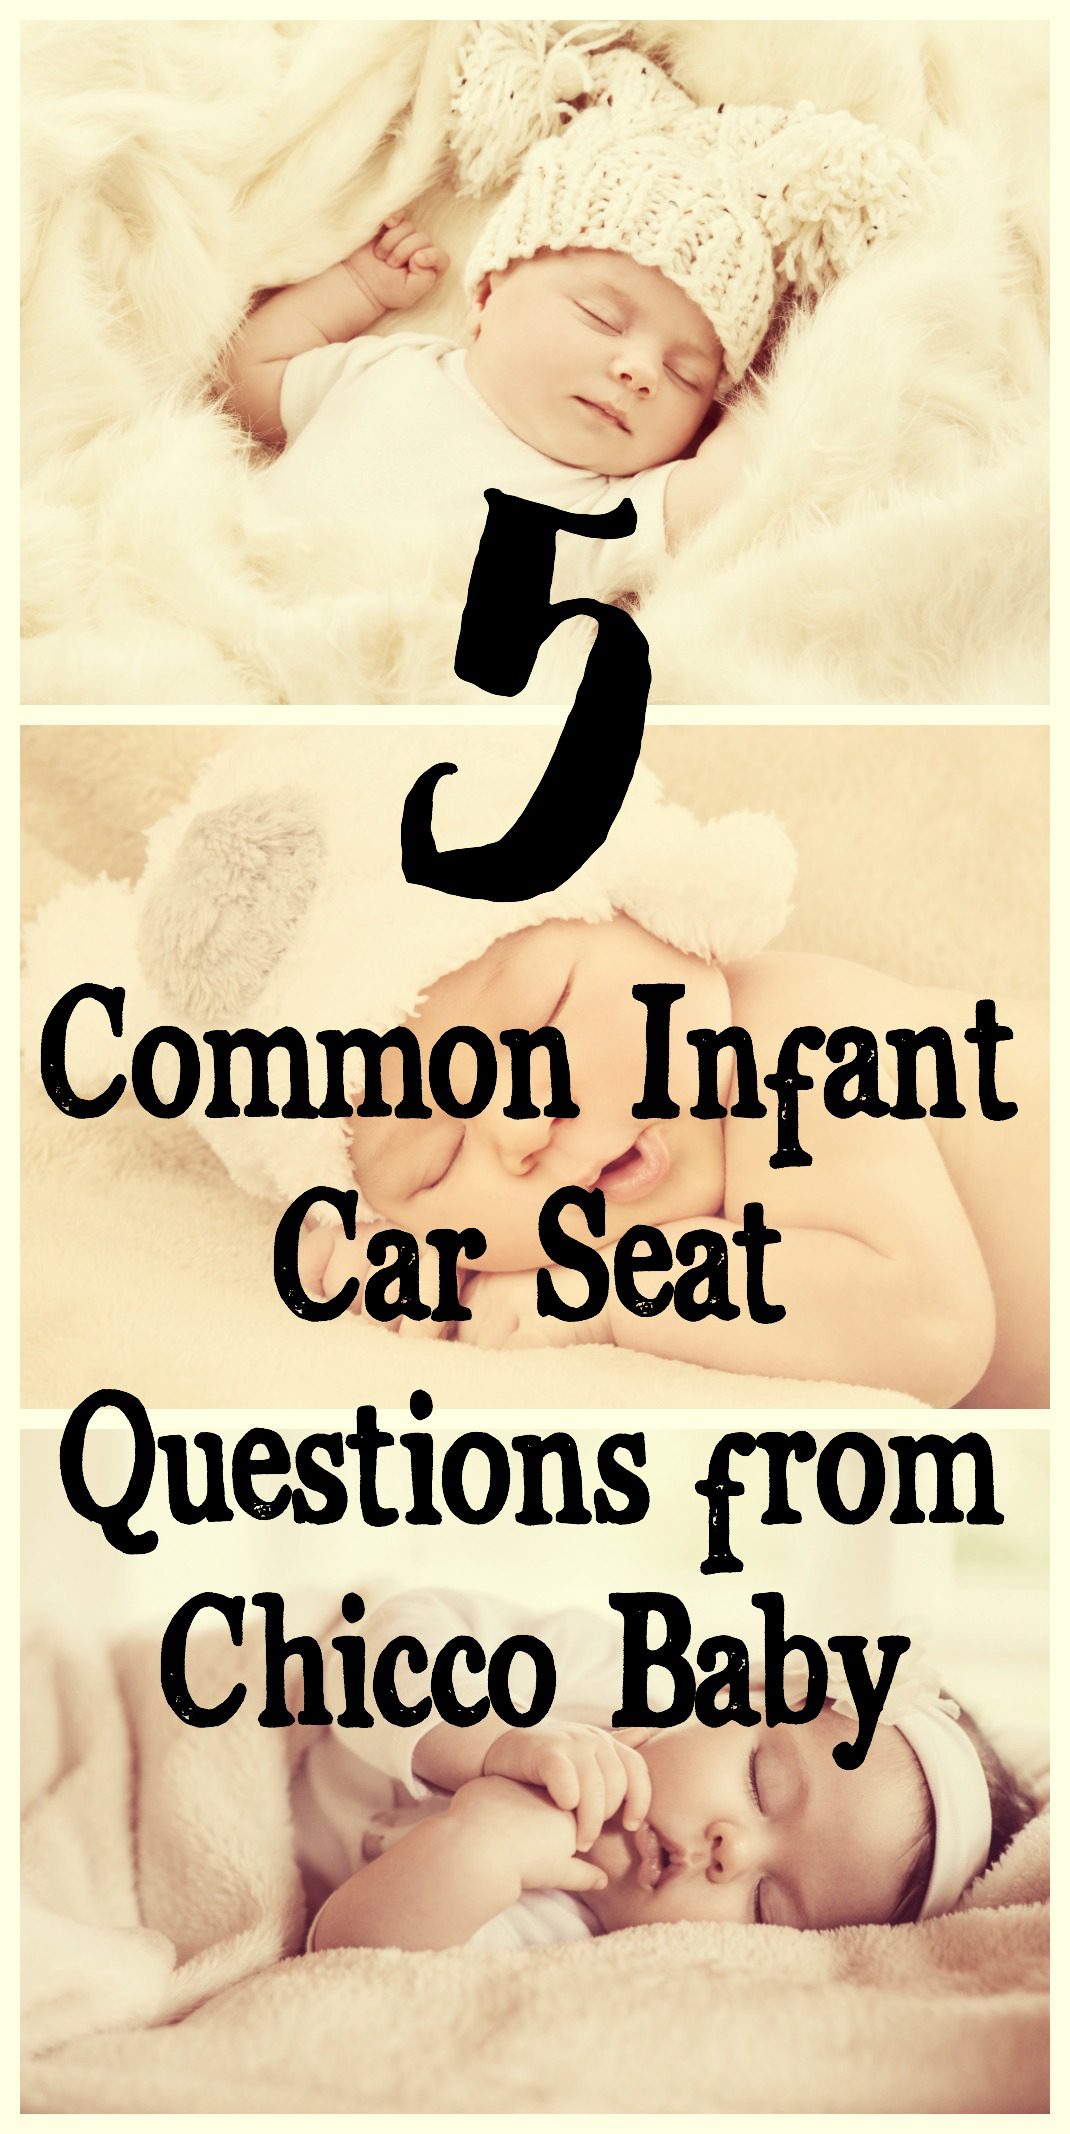 5 Common Infant Car Seat Questions from Chicco Baby 